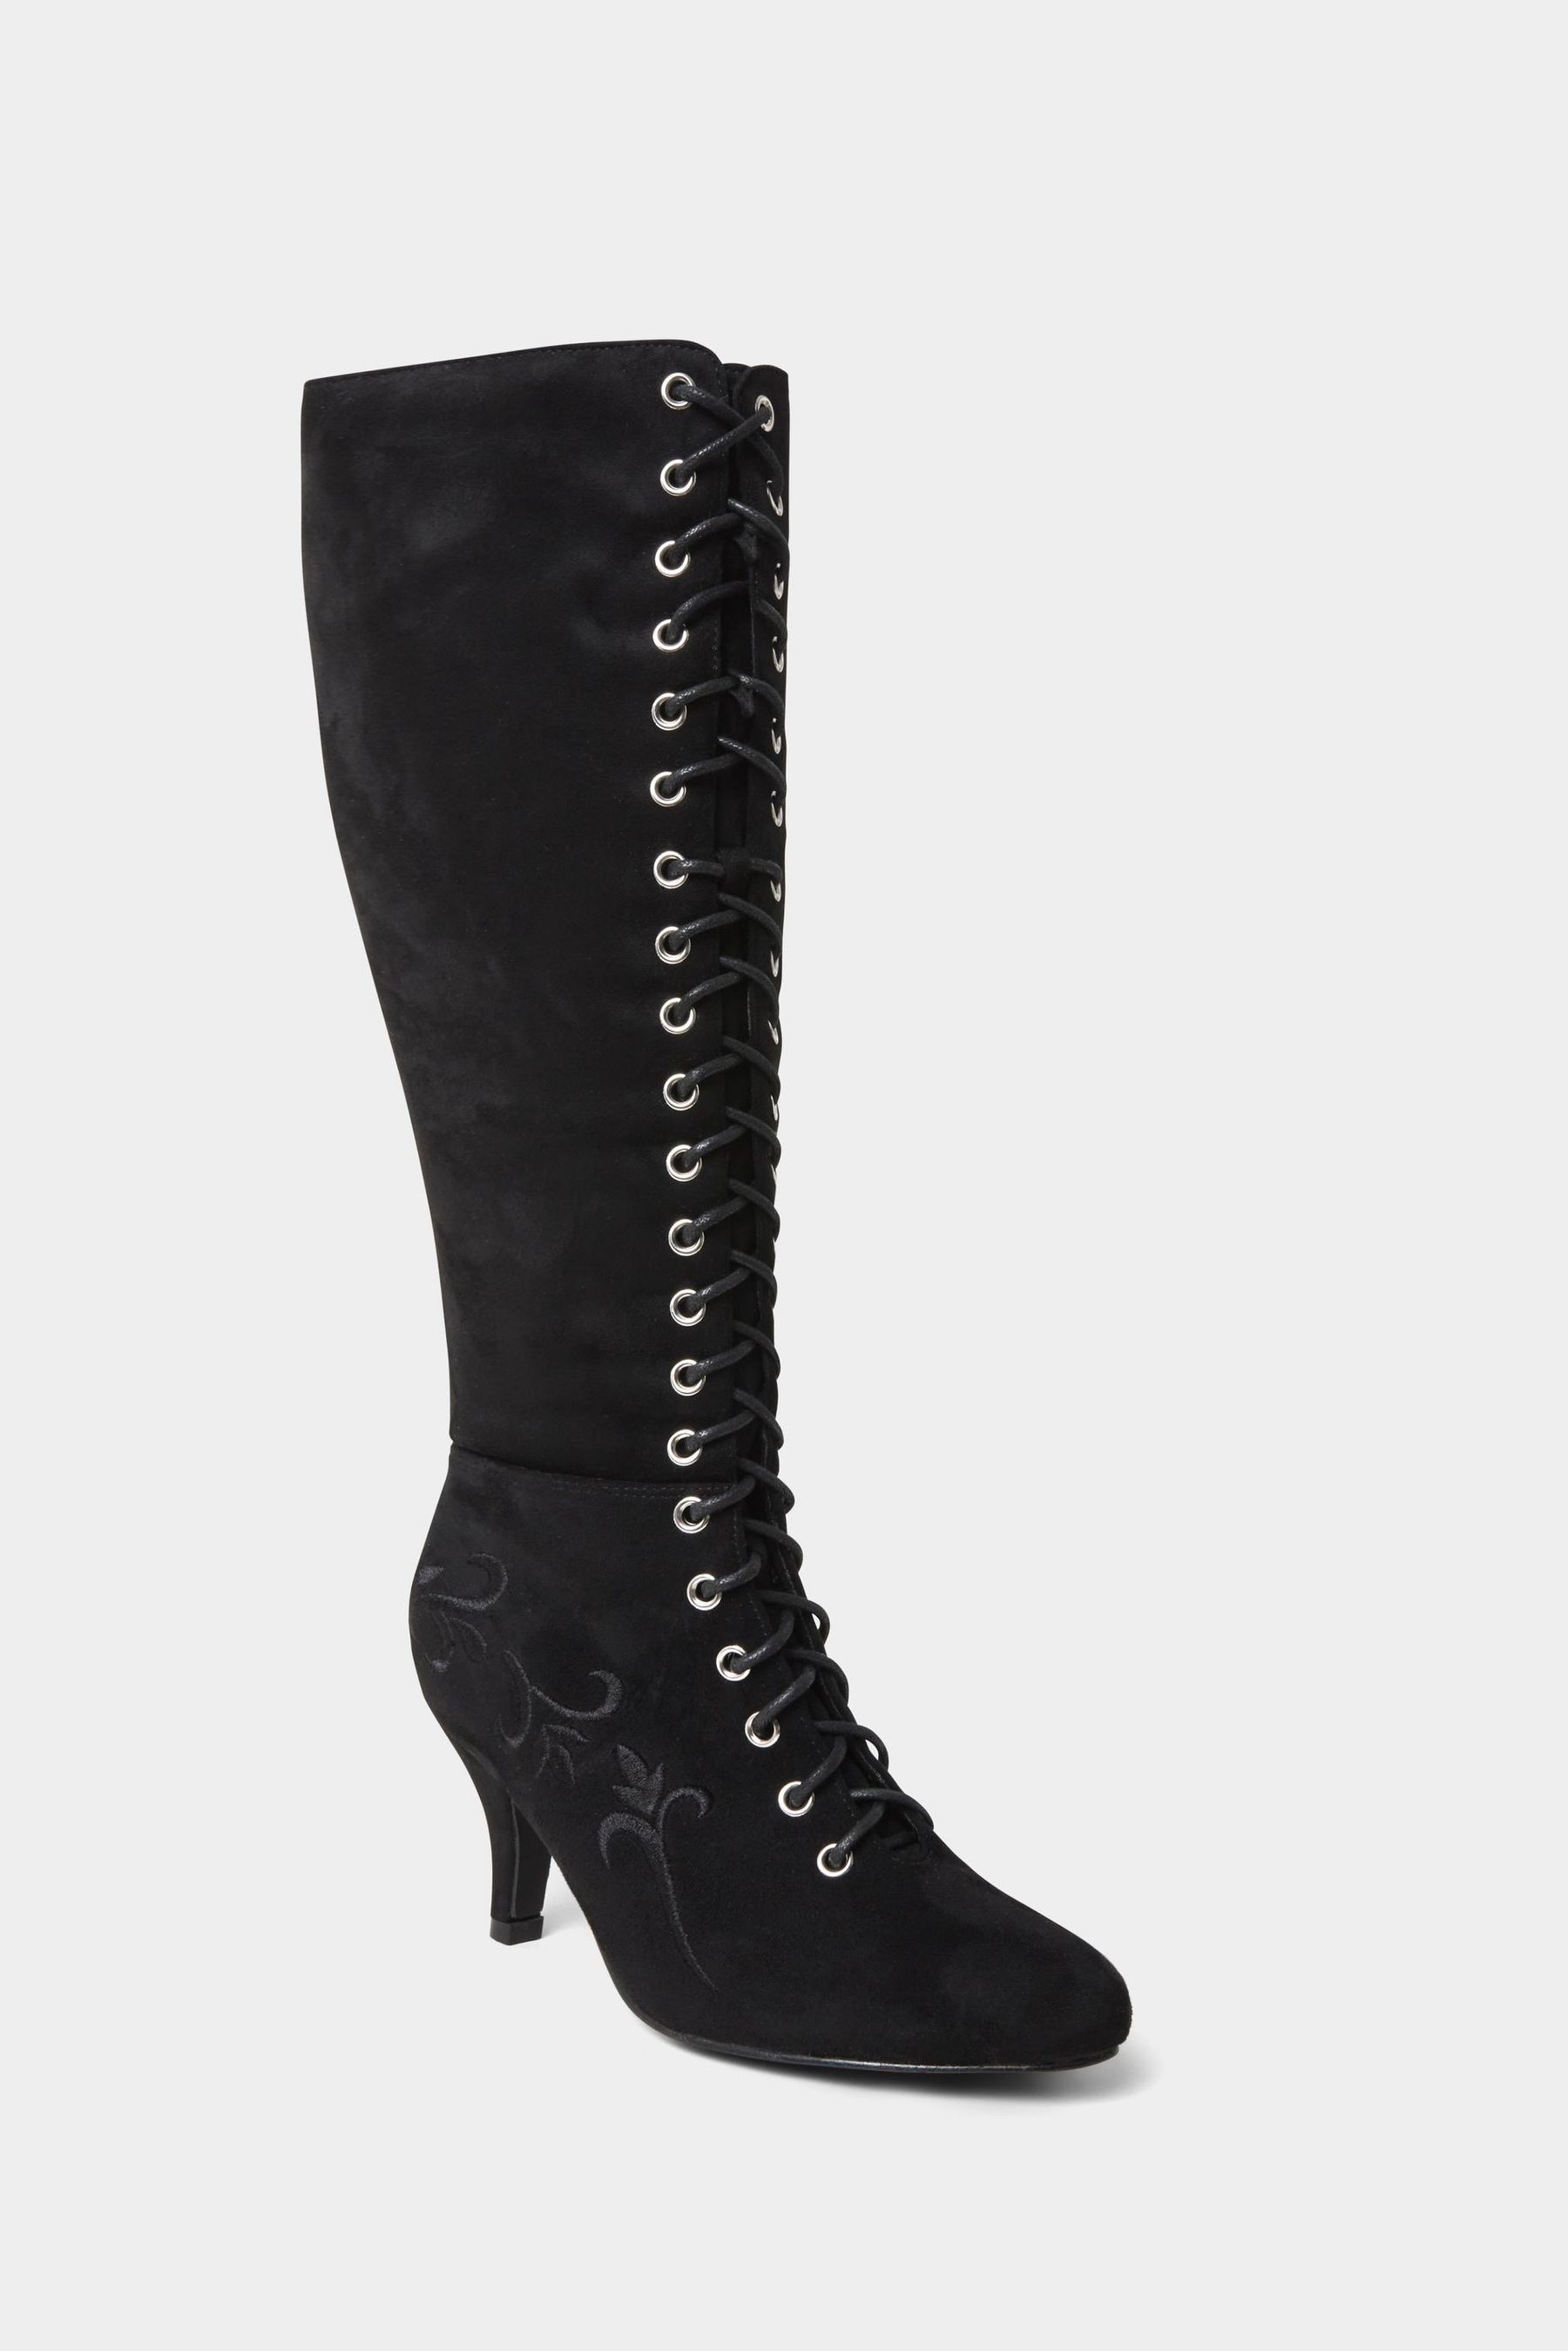 Buy Joe Browns Black Layla Lace-Up Embroidered Boots from the Next UK ...